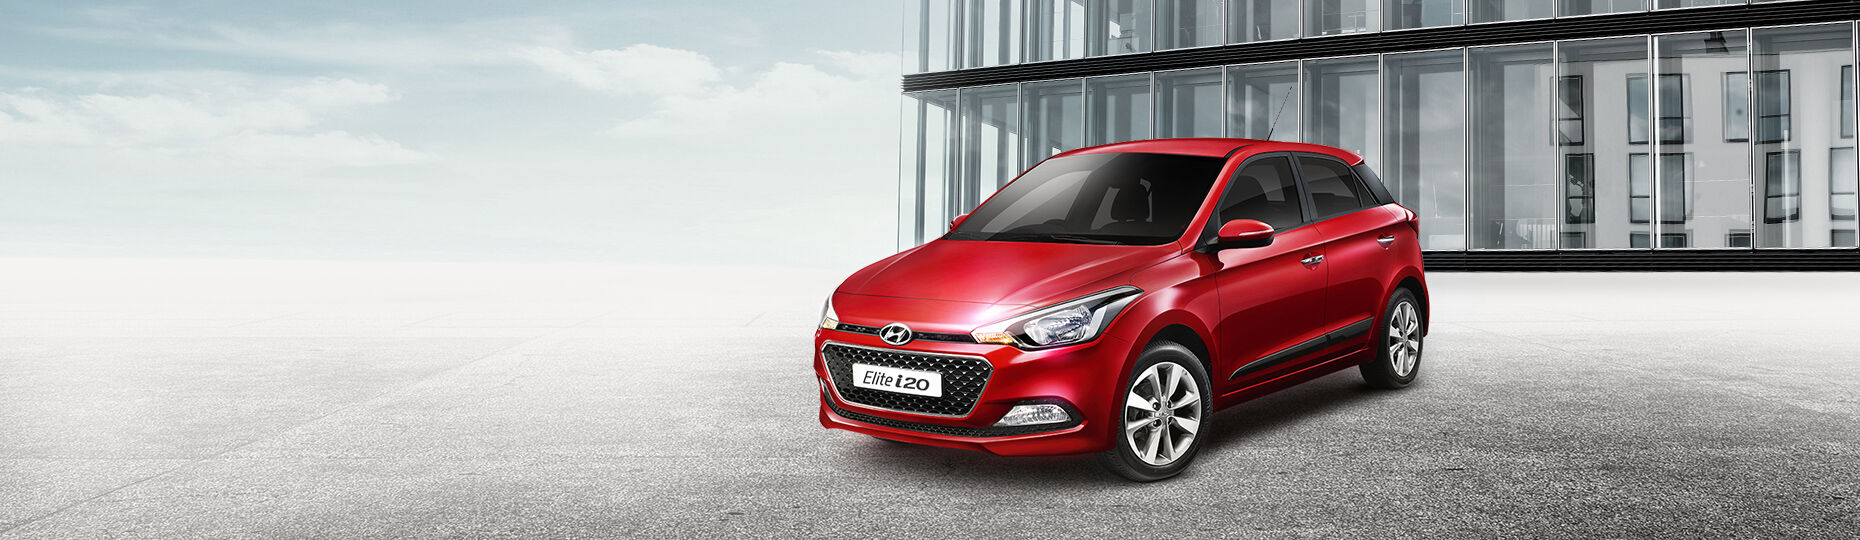 Red color Elite i20 is placed in front of a modern building